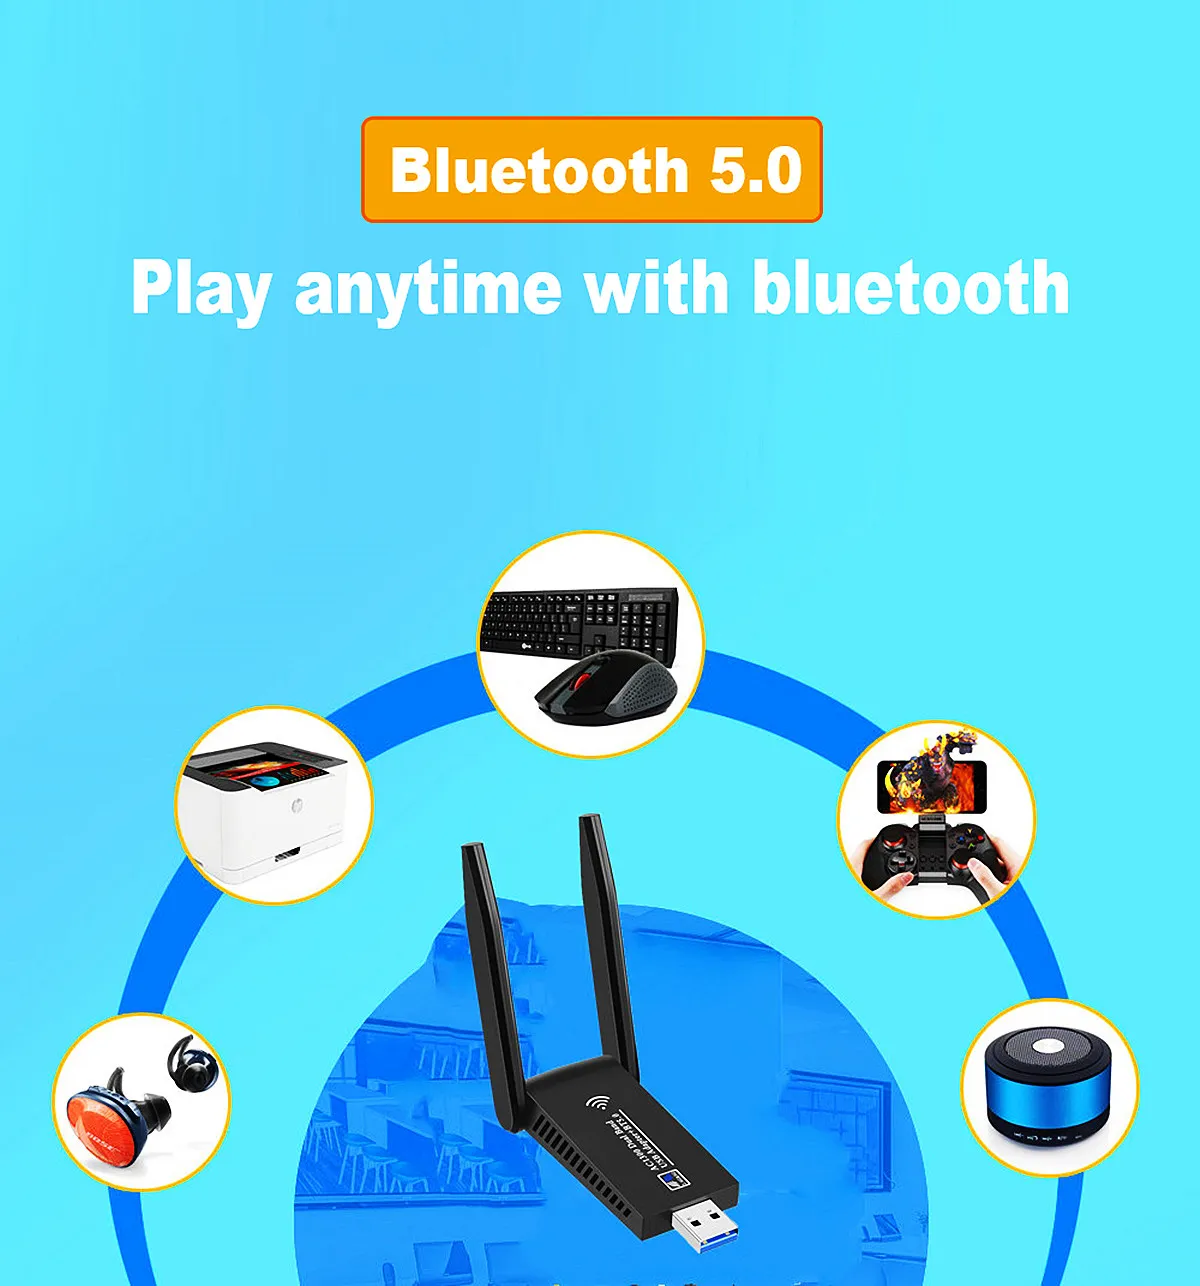 Dual Band USB WiFi Bluetooth Card AC1300 Wireless USB 3.0 Network Adapter  for PC